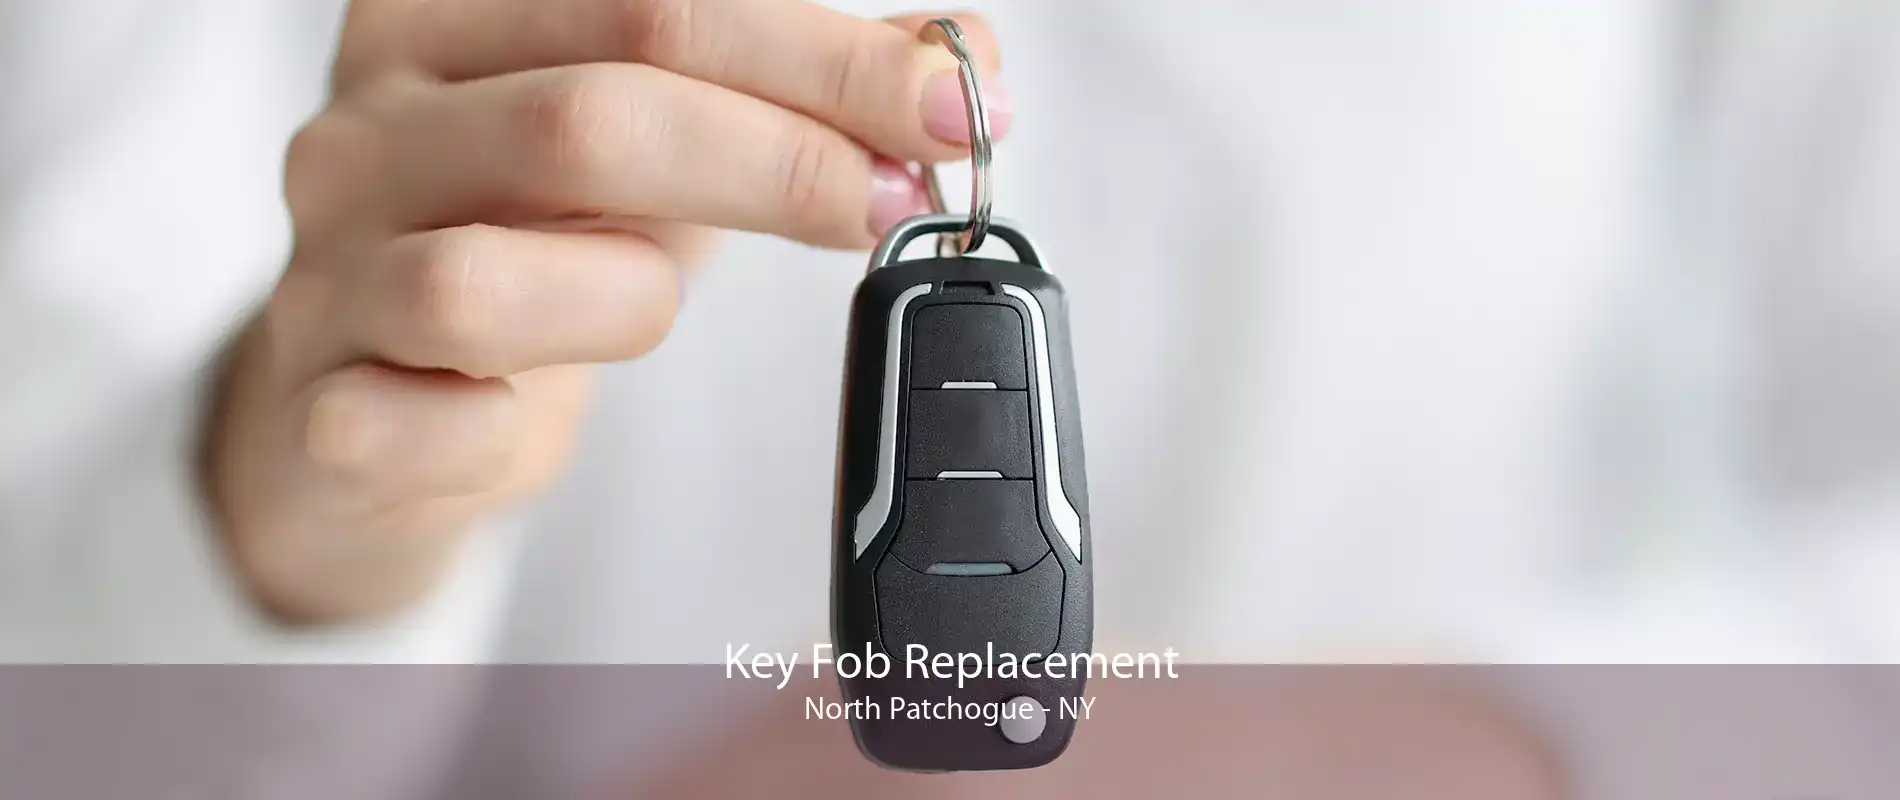 Key Fob Replacement North Patchogue - NY